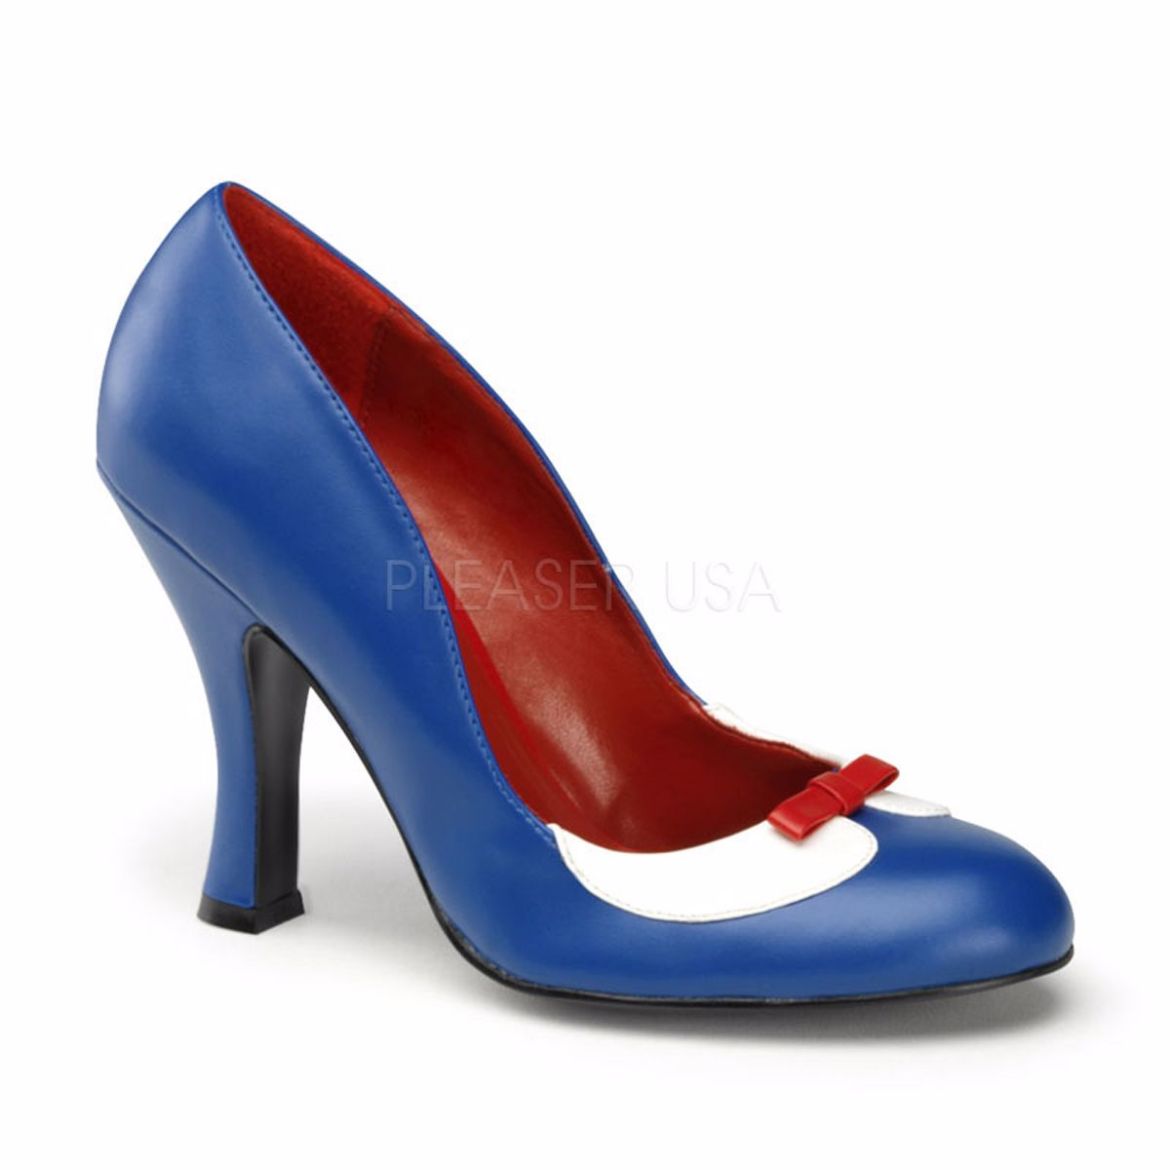 Product image of Pin Up Couture Smitten-05 Navy Blue-White Pu, 4 inch (10.2 cm) Heel Court Pump Shoes